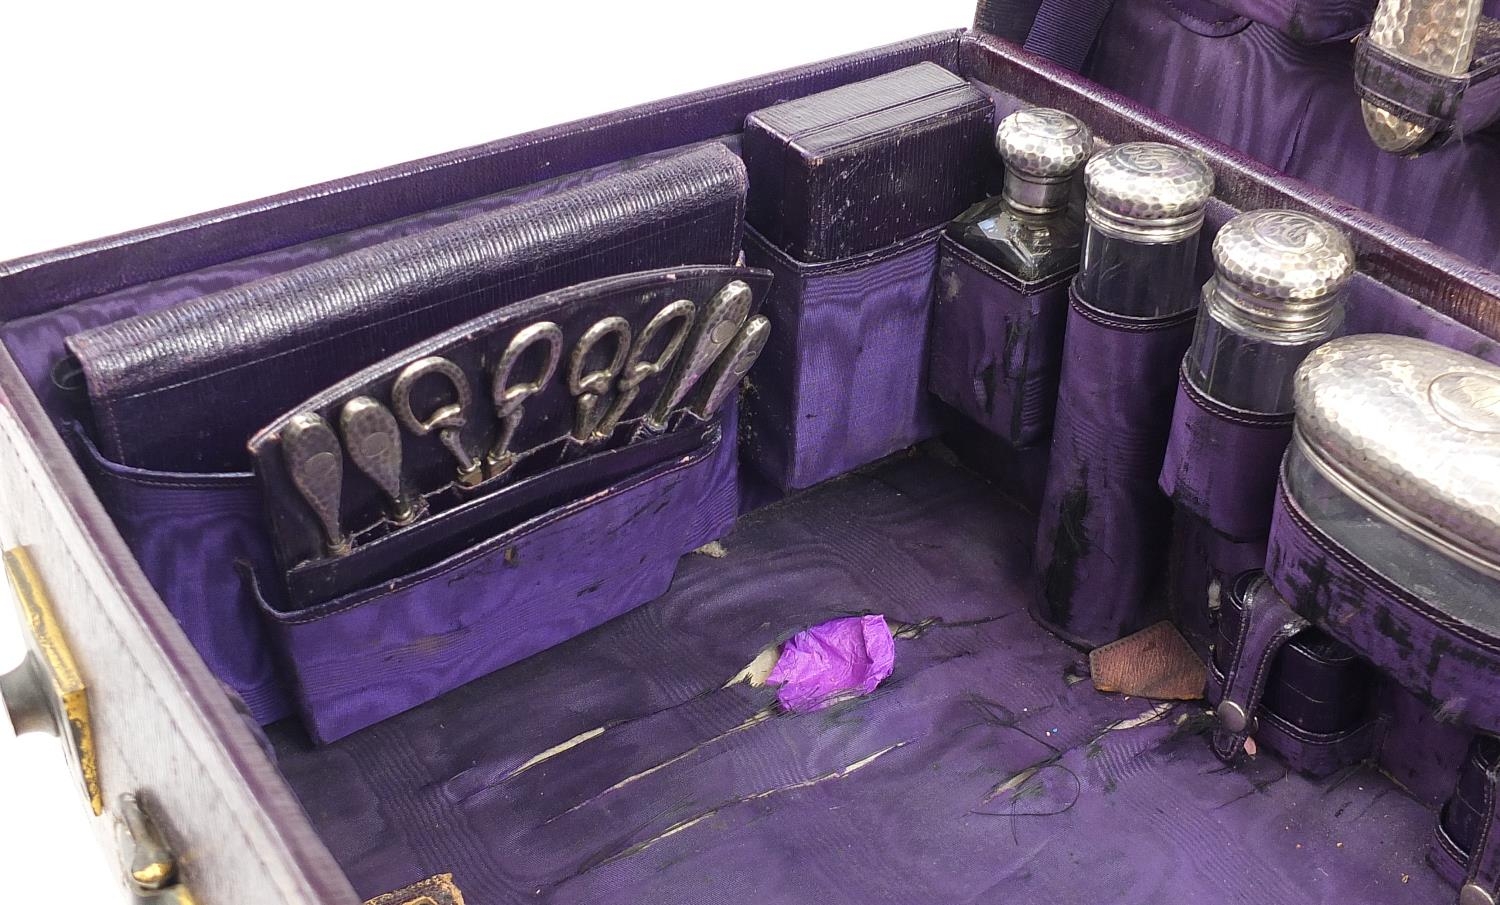 Edwardian purple leather travelling vanity case with silver mounted items including brushes, - Image 3 of 8